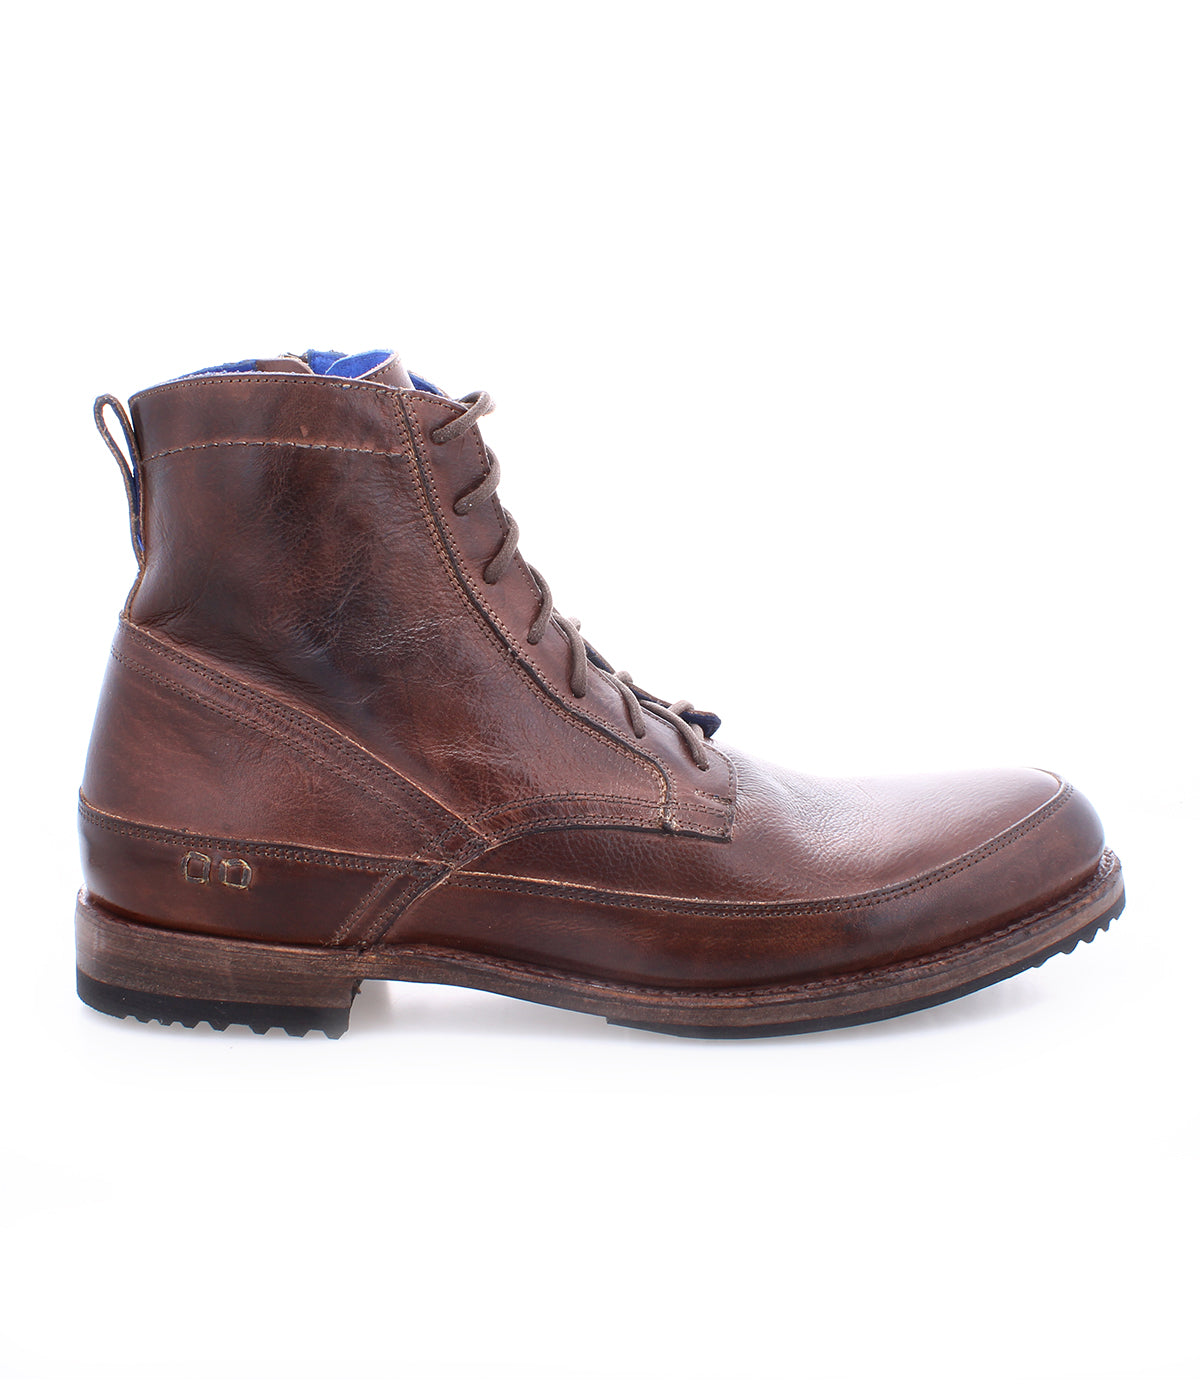 A single brown leather Bed Stu Spiker lace-up ankle boot isolated on a white background.